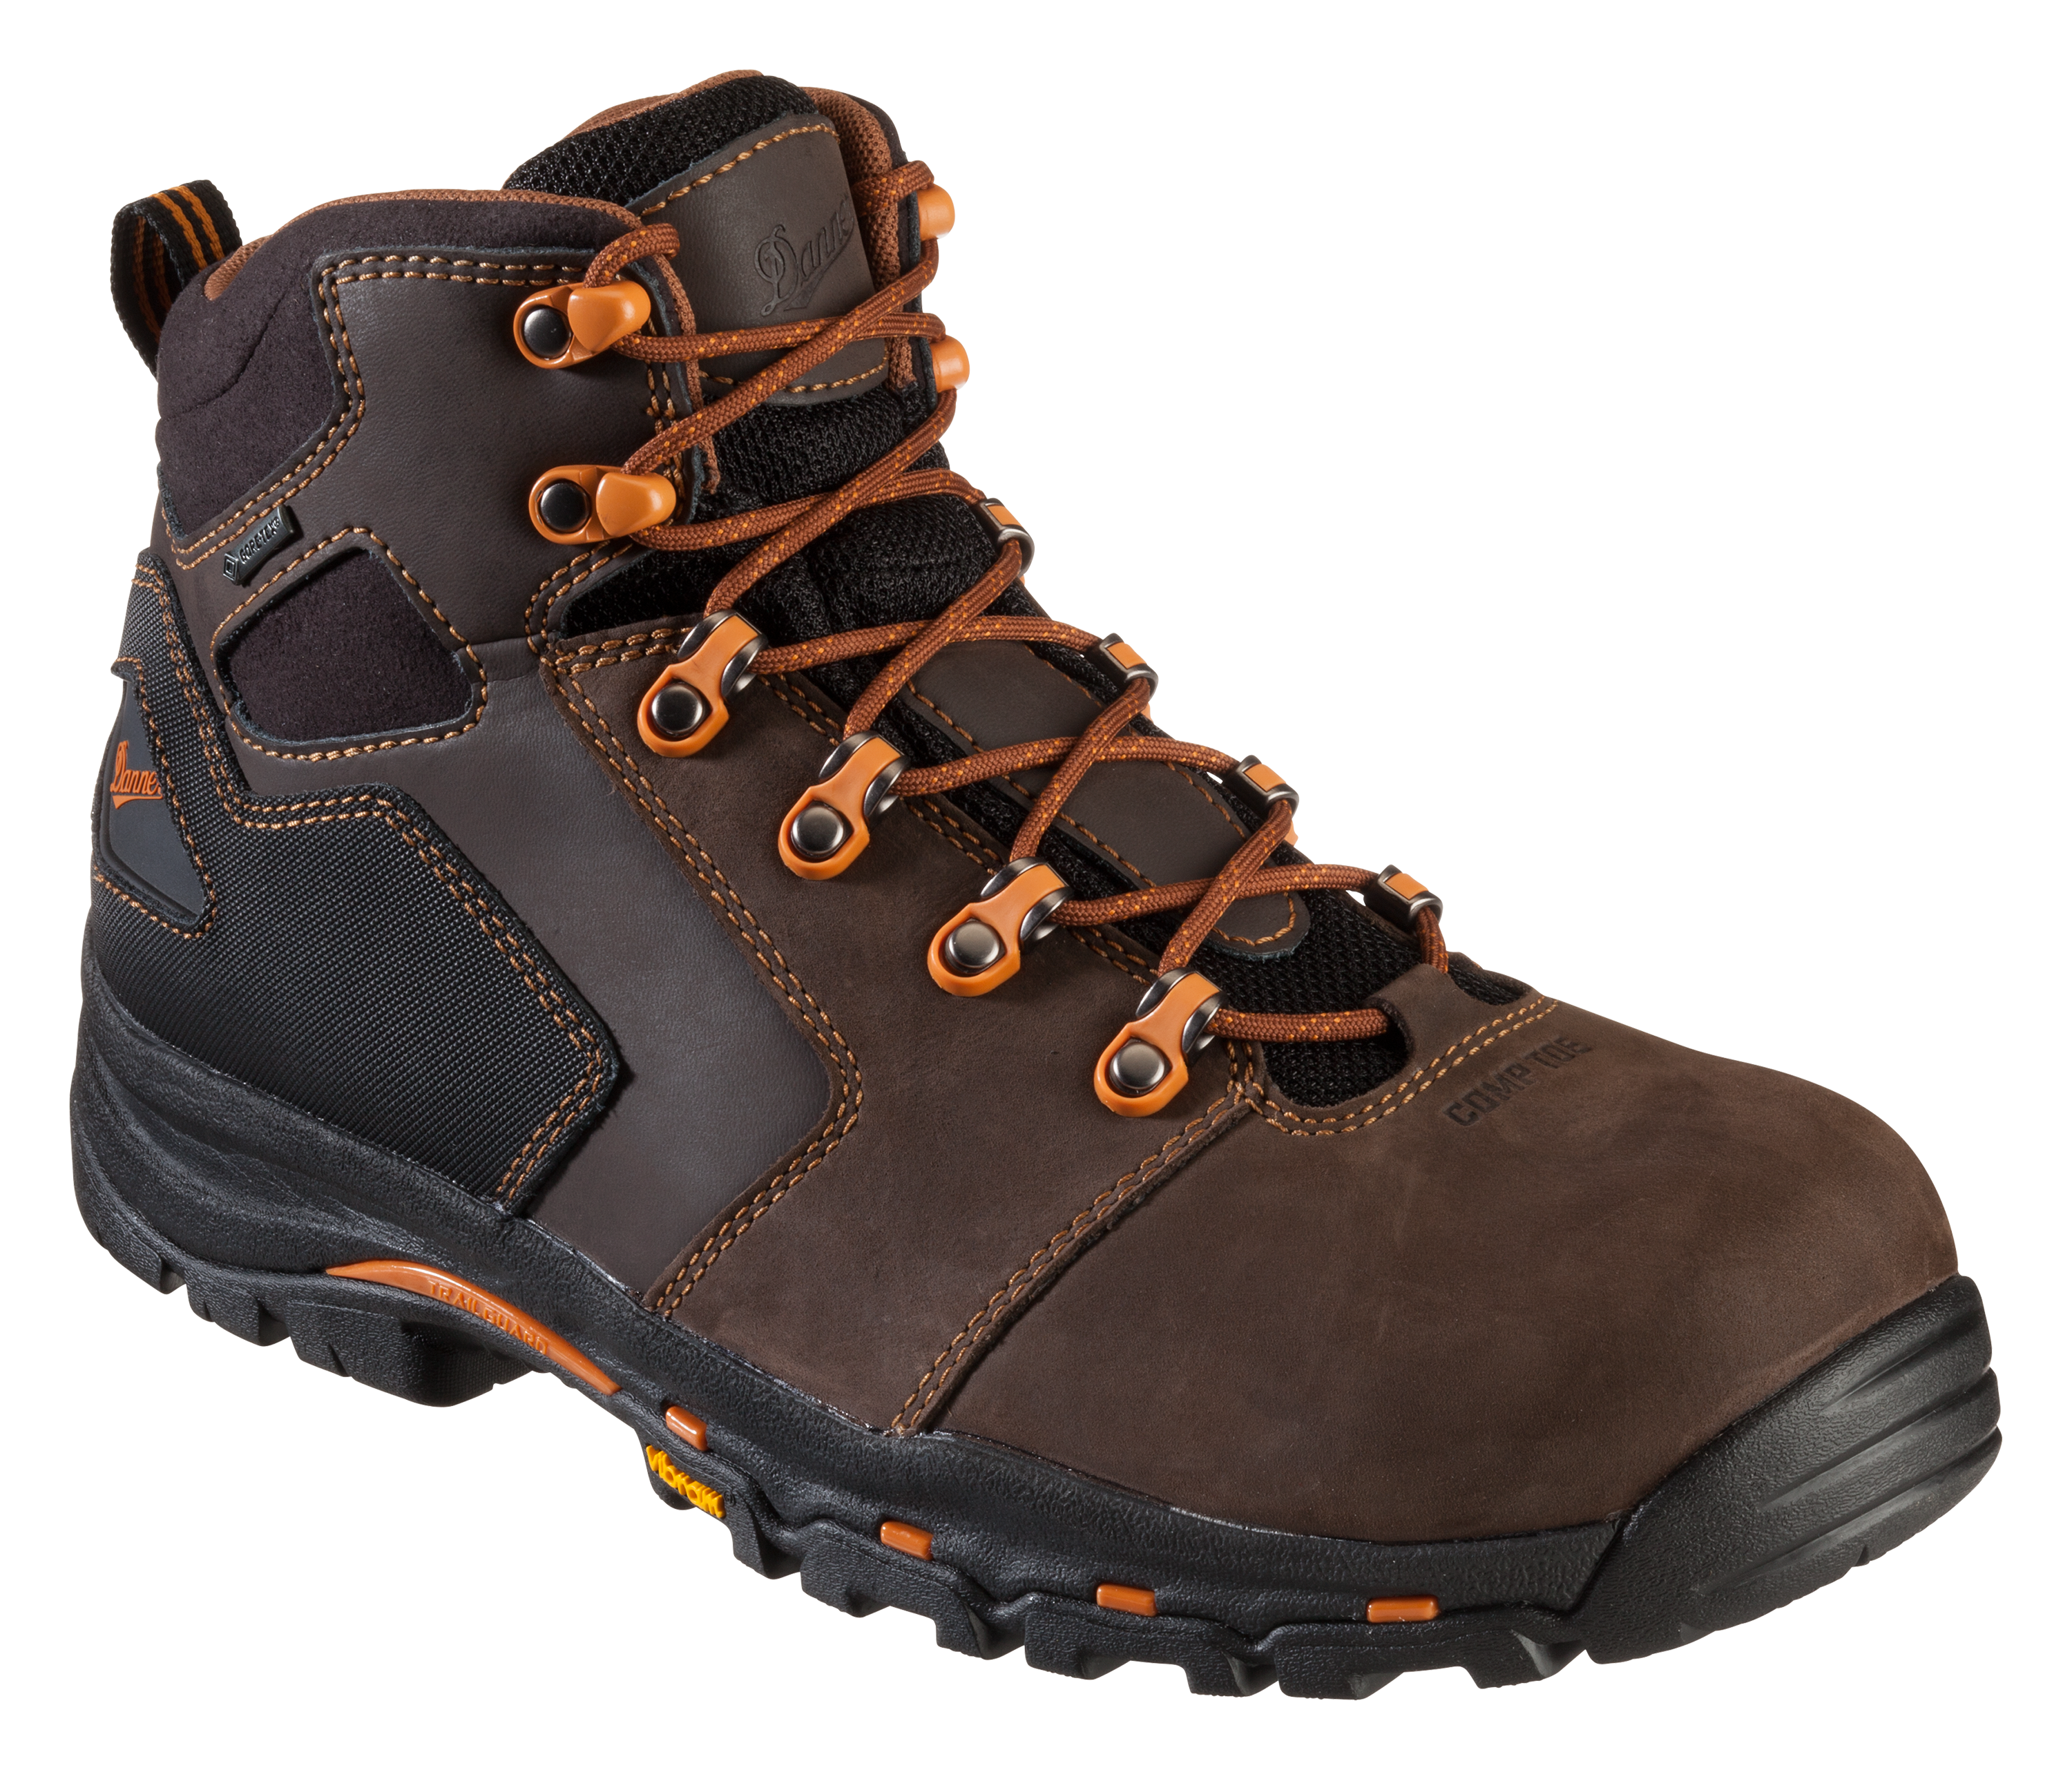 Danner Vicious GORE-TEX Non-Metallic Safety Toe Work Boots for Men - Brown - 9M